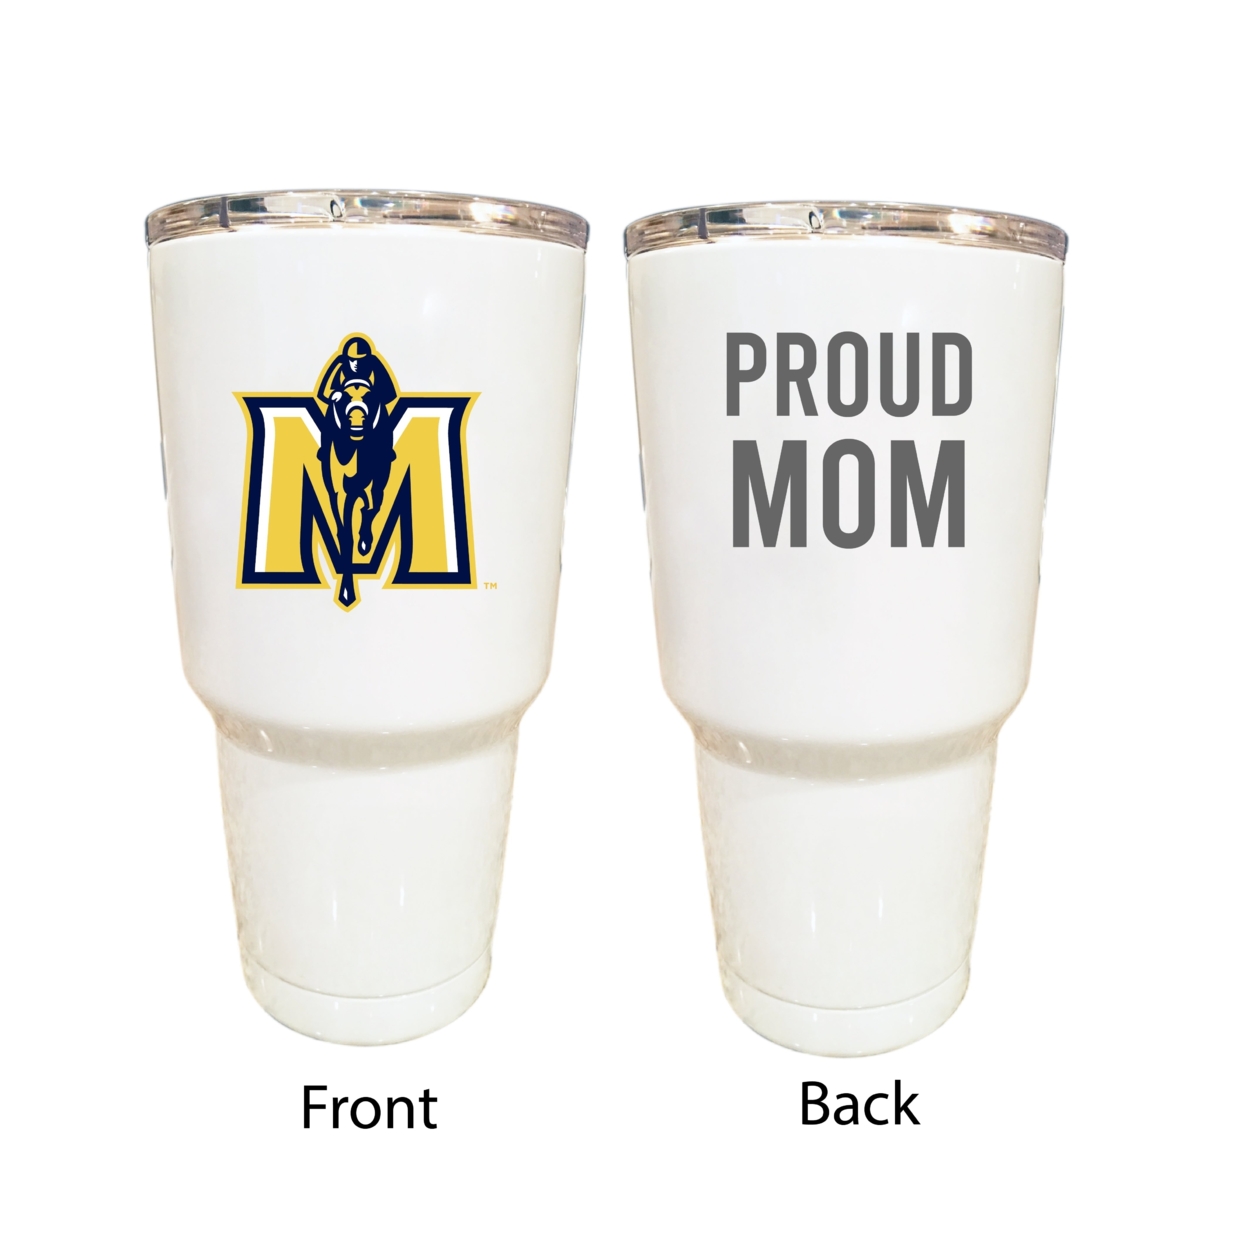 Murray State University Proud Mom 24 Oz Insulated Stainless Steel Tumblers Choose Your Color.